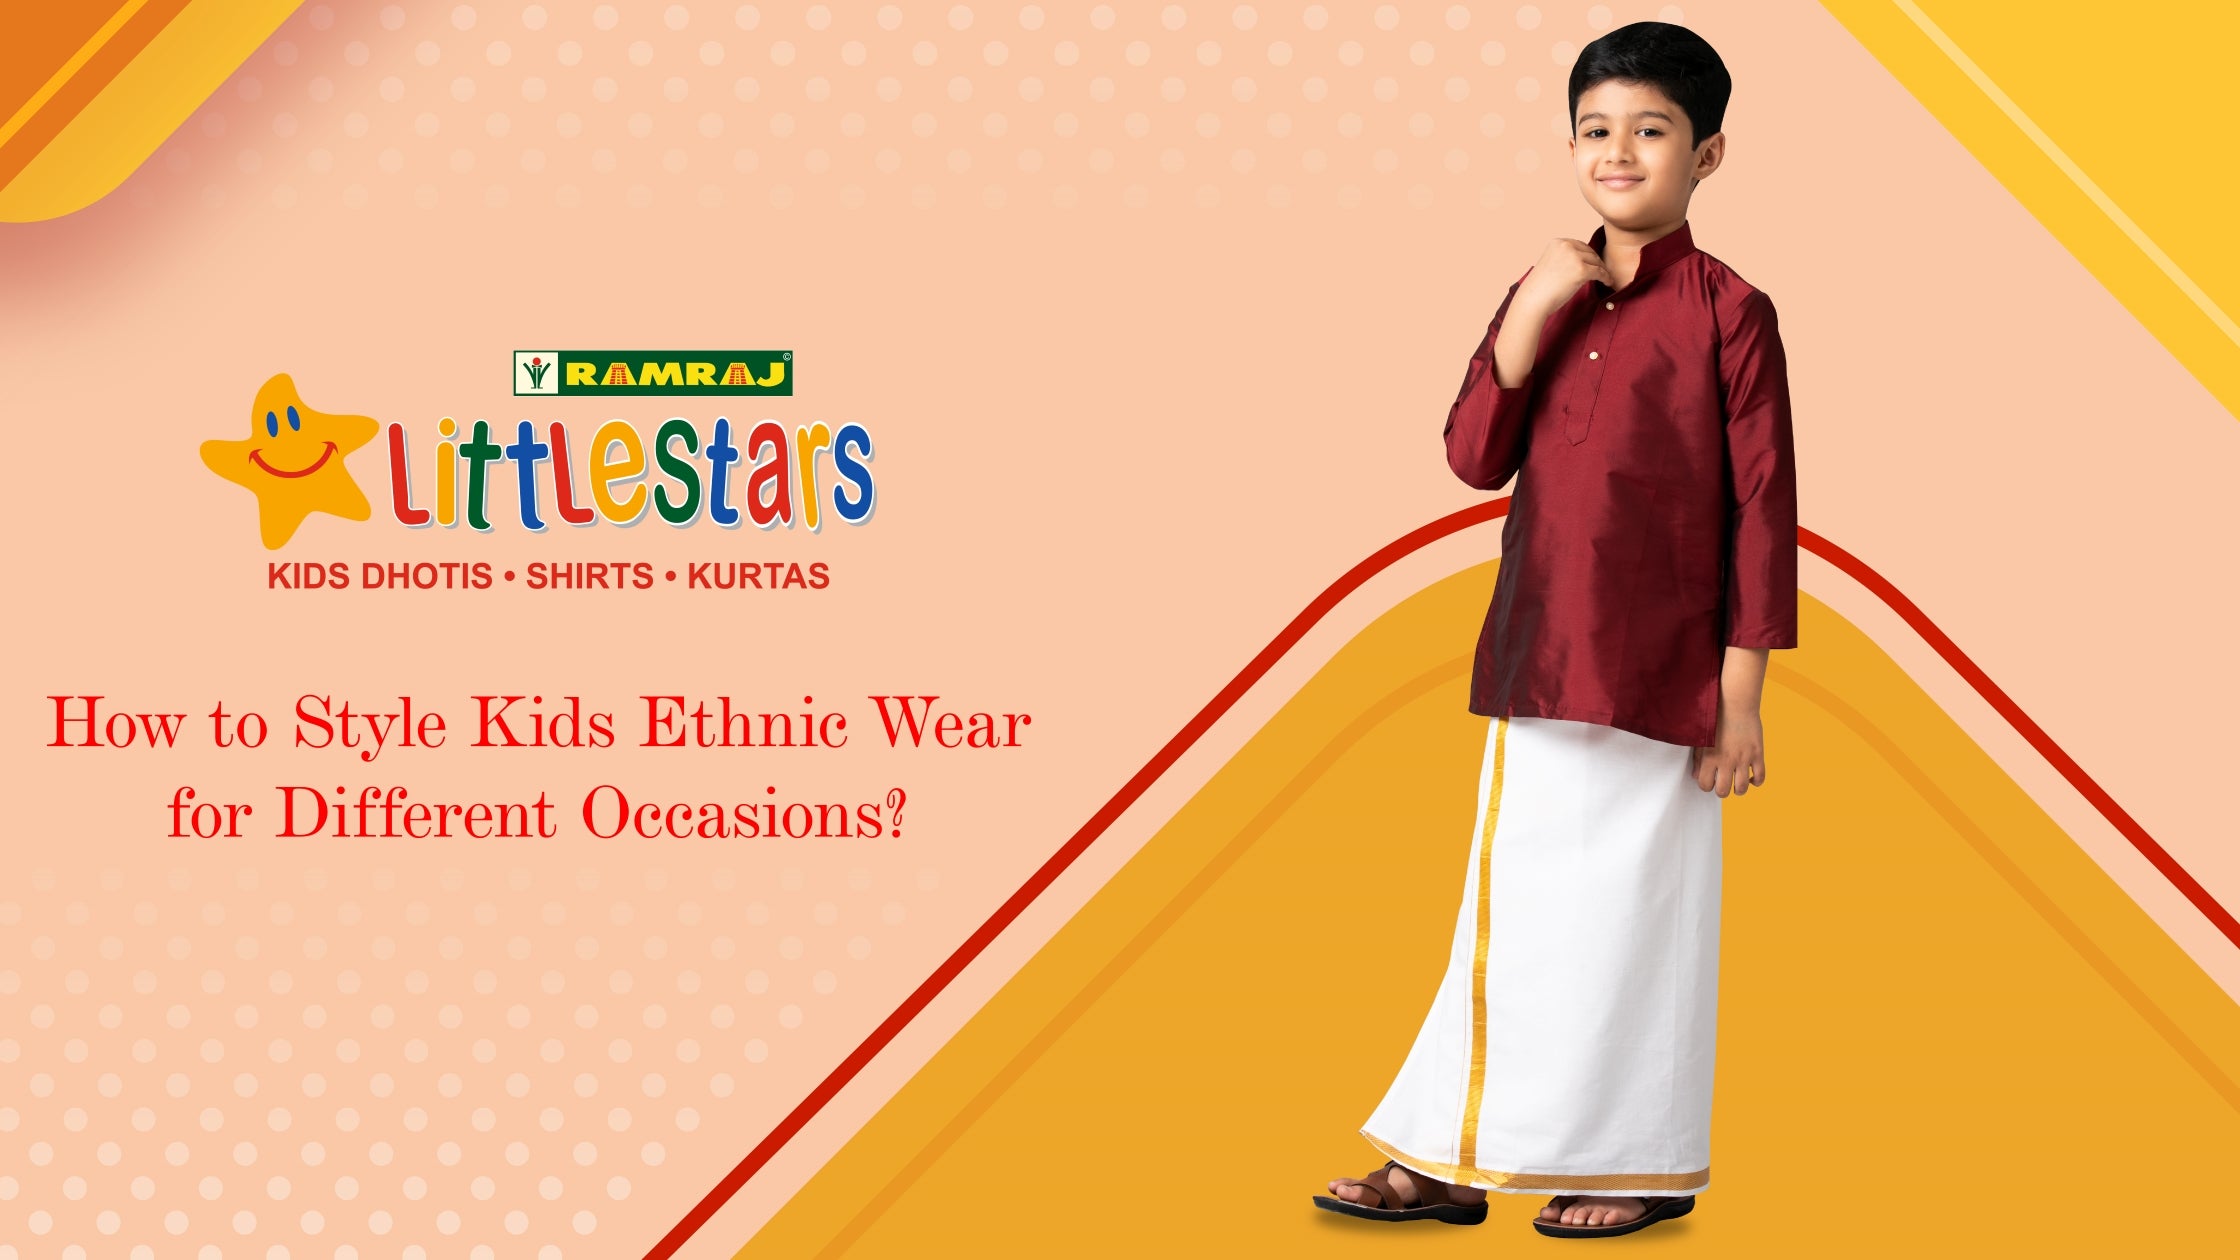 How to Style Kids Ethnic Wear for Different Occasions?